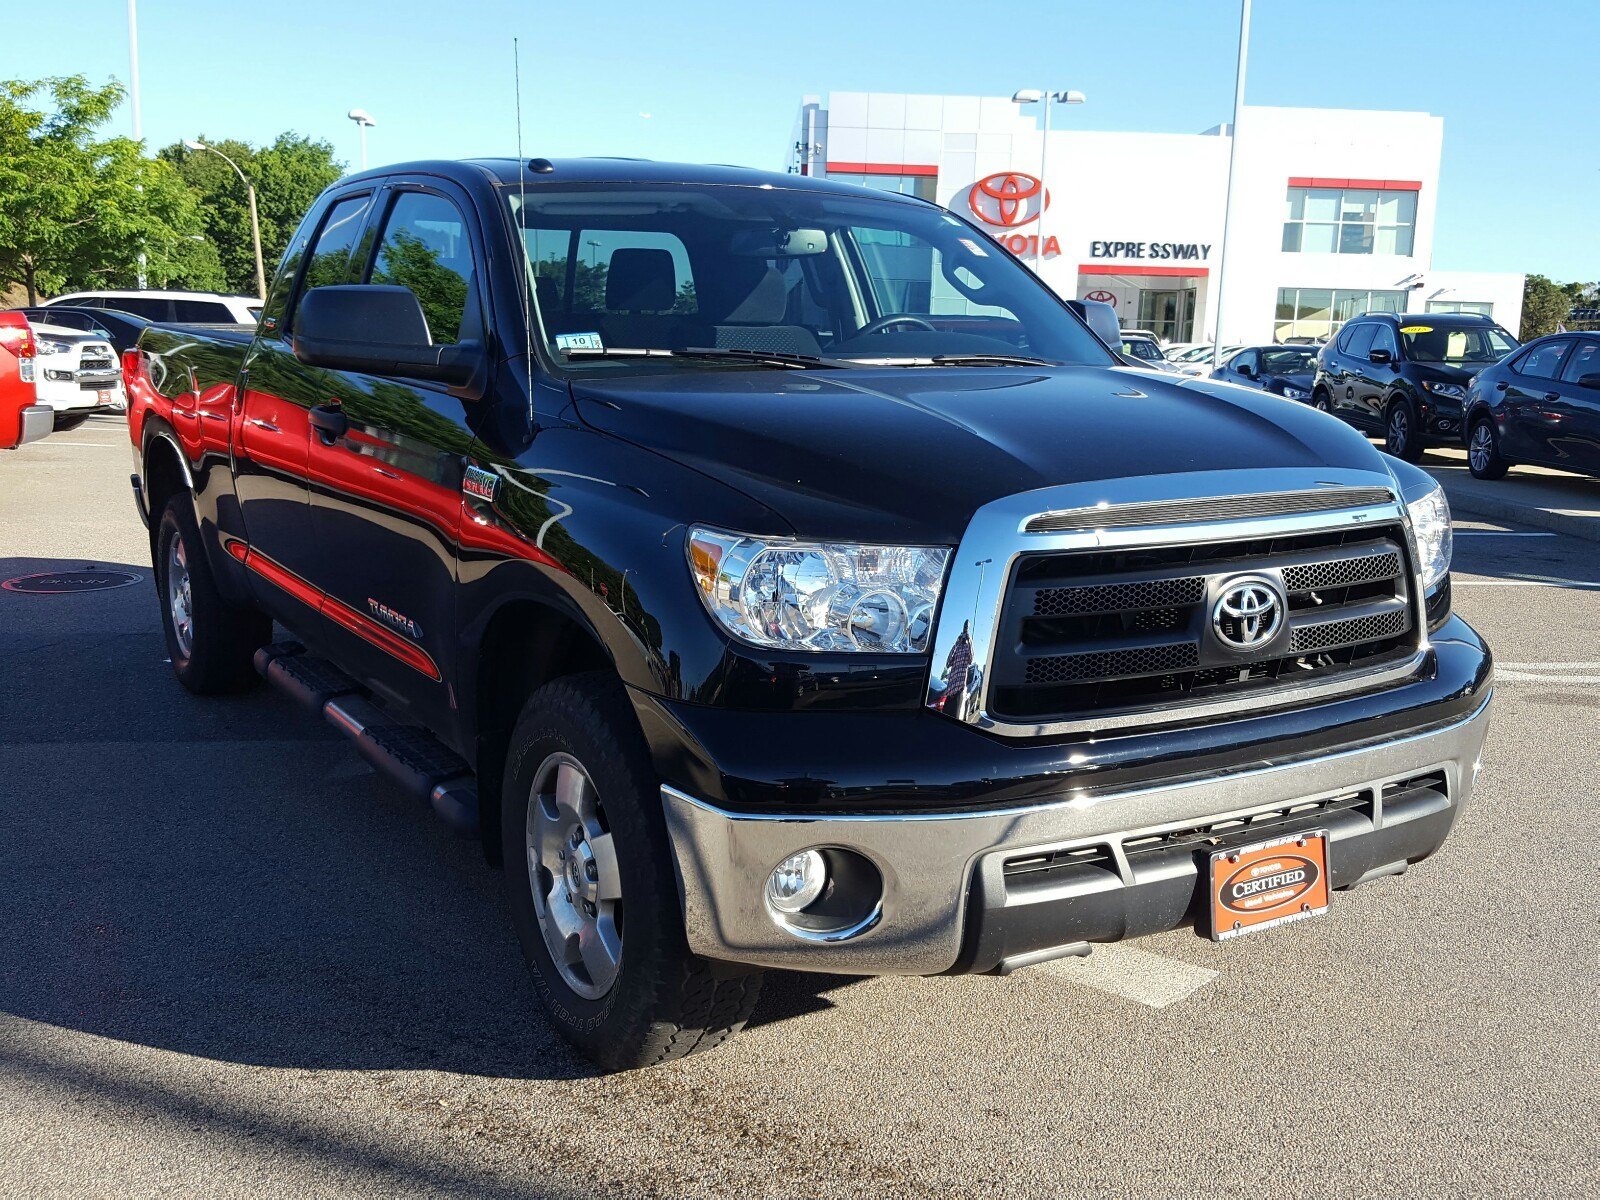 Certified Pre-Owned 2013 Toyota Tundra DLX Crew Cab Pickup in Boston